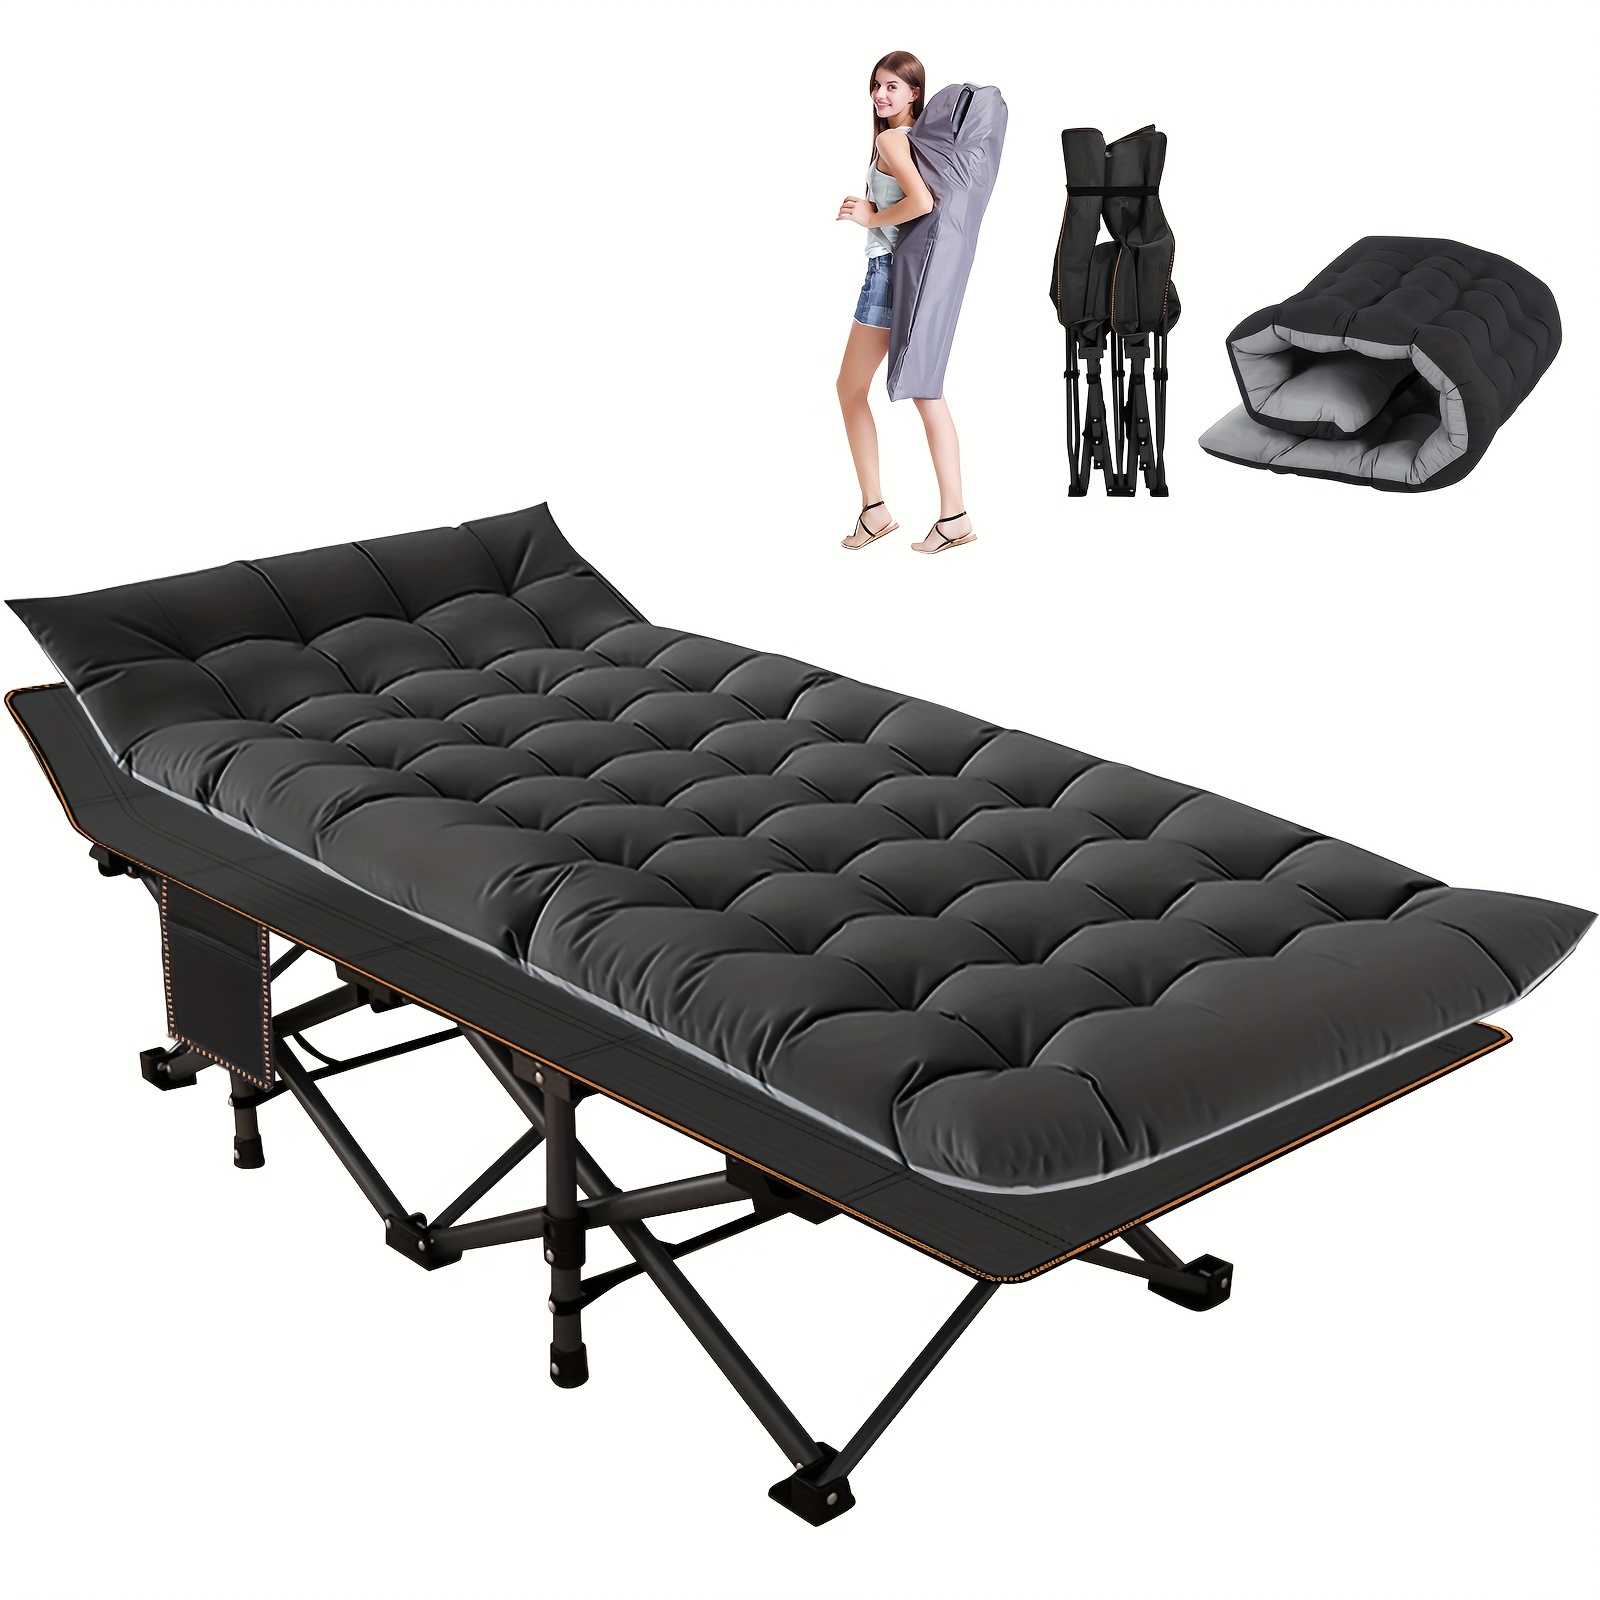 

Mophoto Folding Bed For Adults, Rollaway Guest Bed Sleeping Cot, Portable Heavy Duty Outdoor Camping Cot With Carry Bag